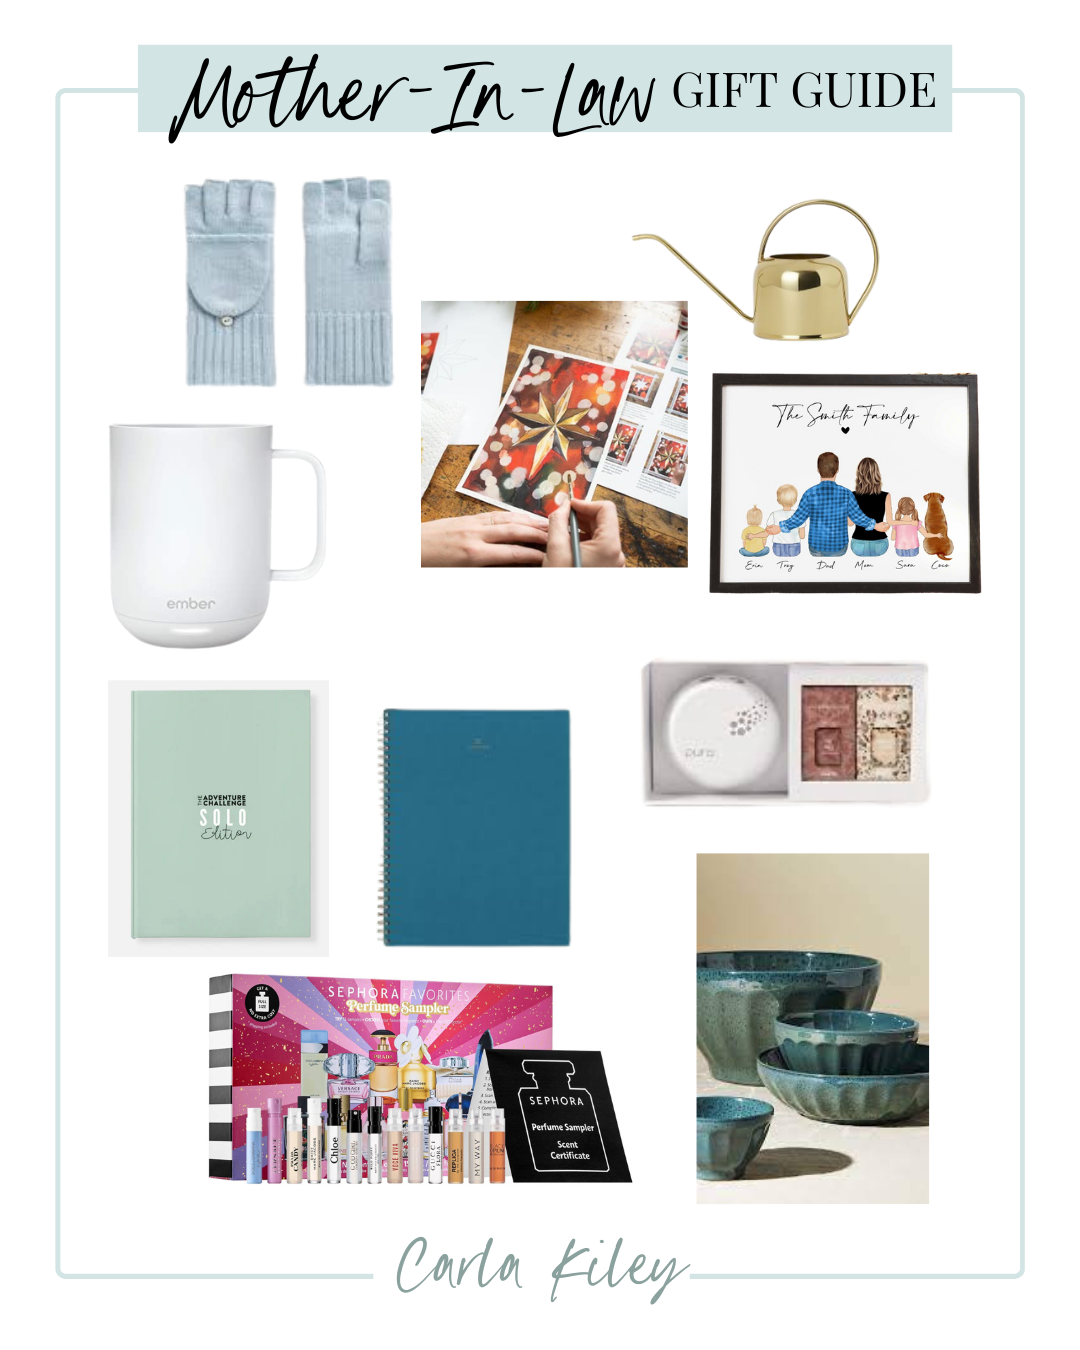 https://www.carlakiley.com/wp-content/uploads/2022/11/GIFT-GUIDE-1.png